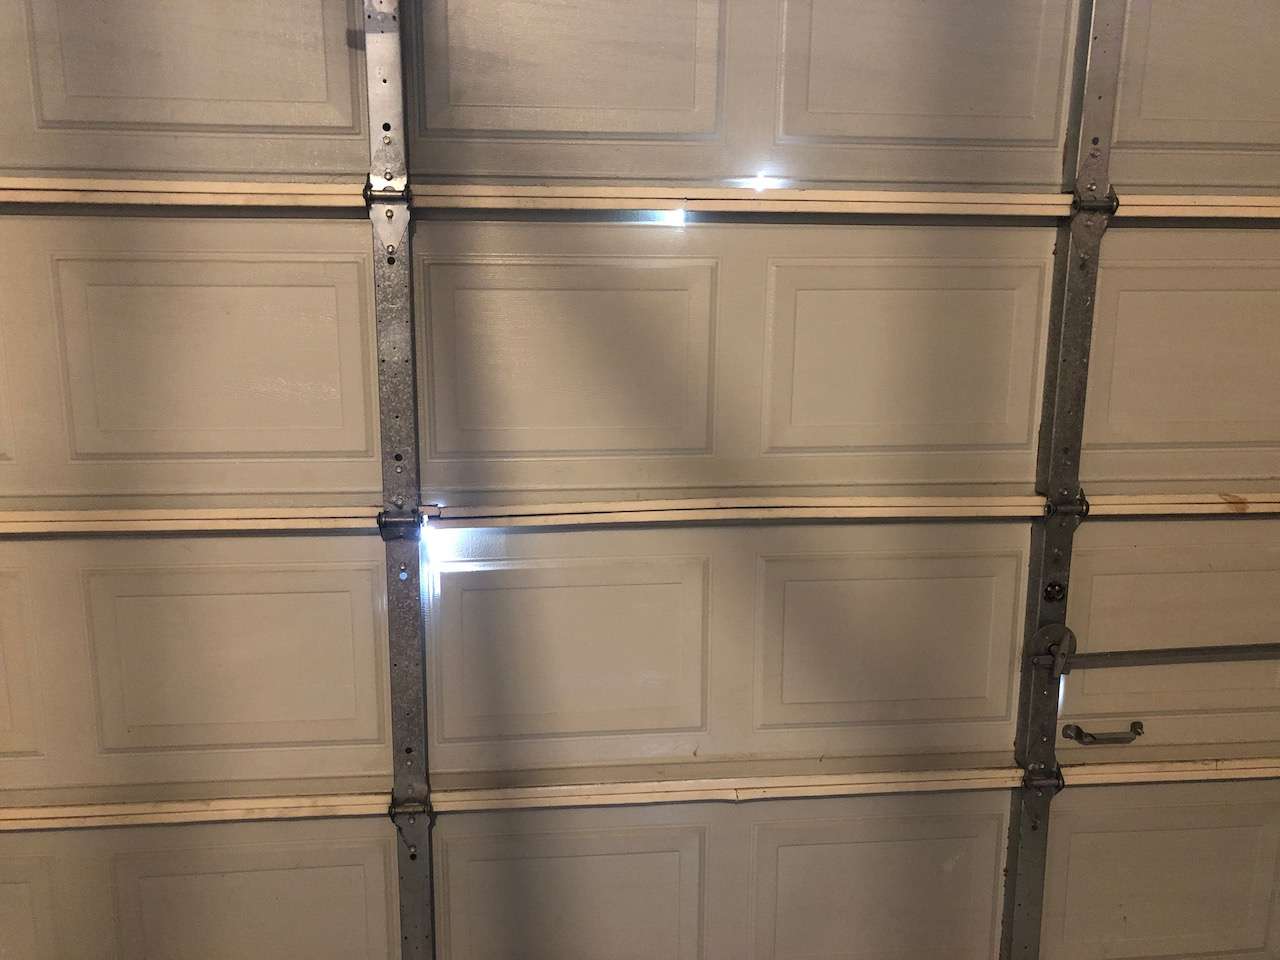 This aging garage door is starting to generate cracks in all the sections. At that point it might be time for replacement.